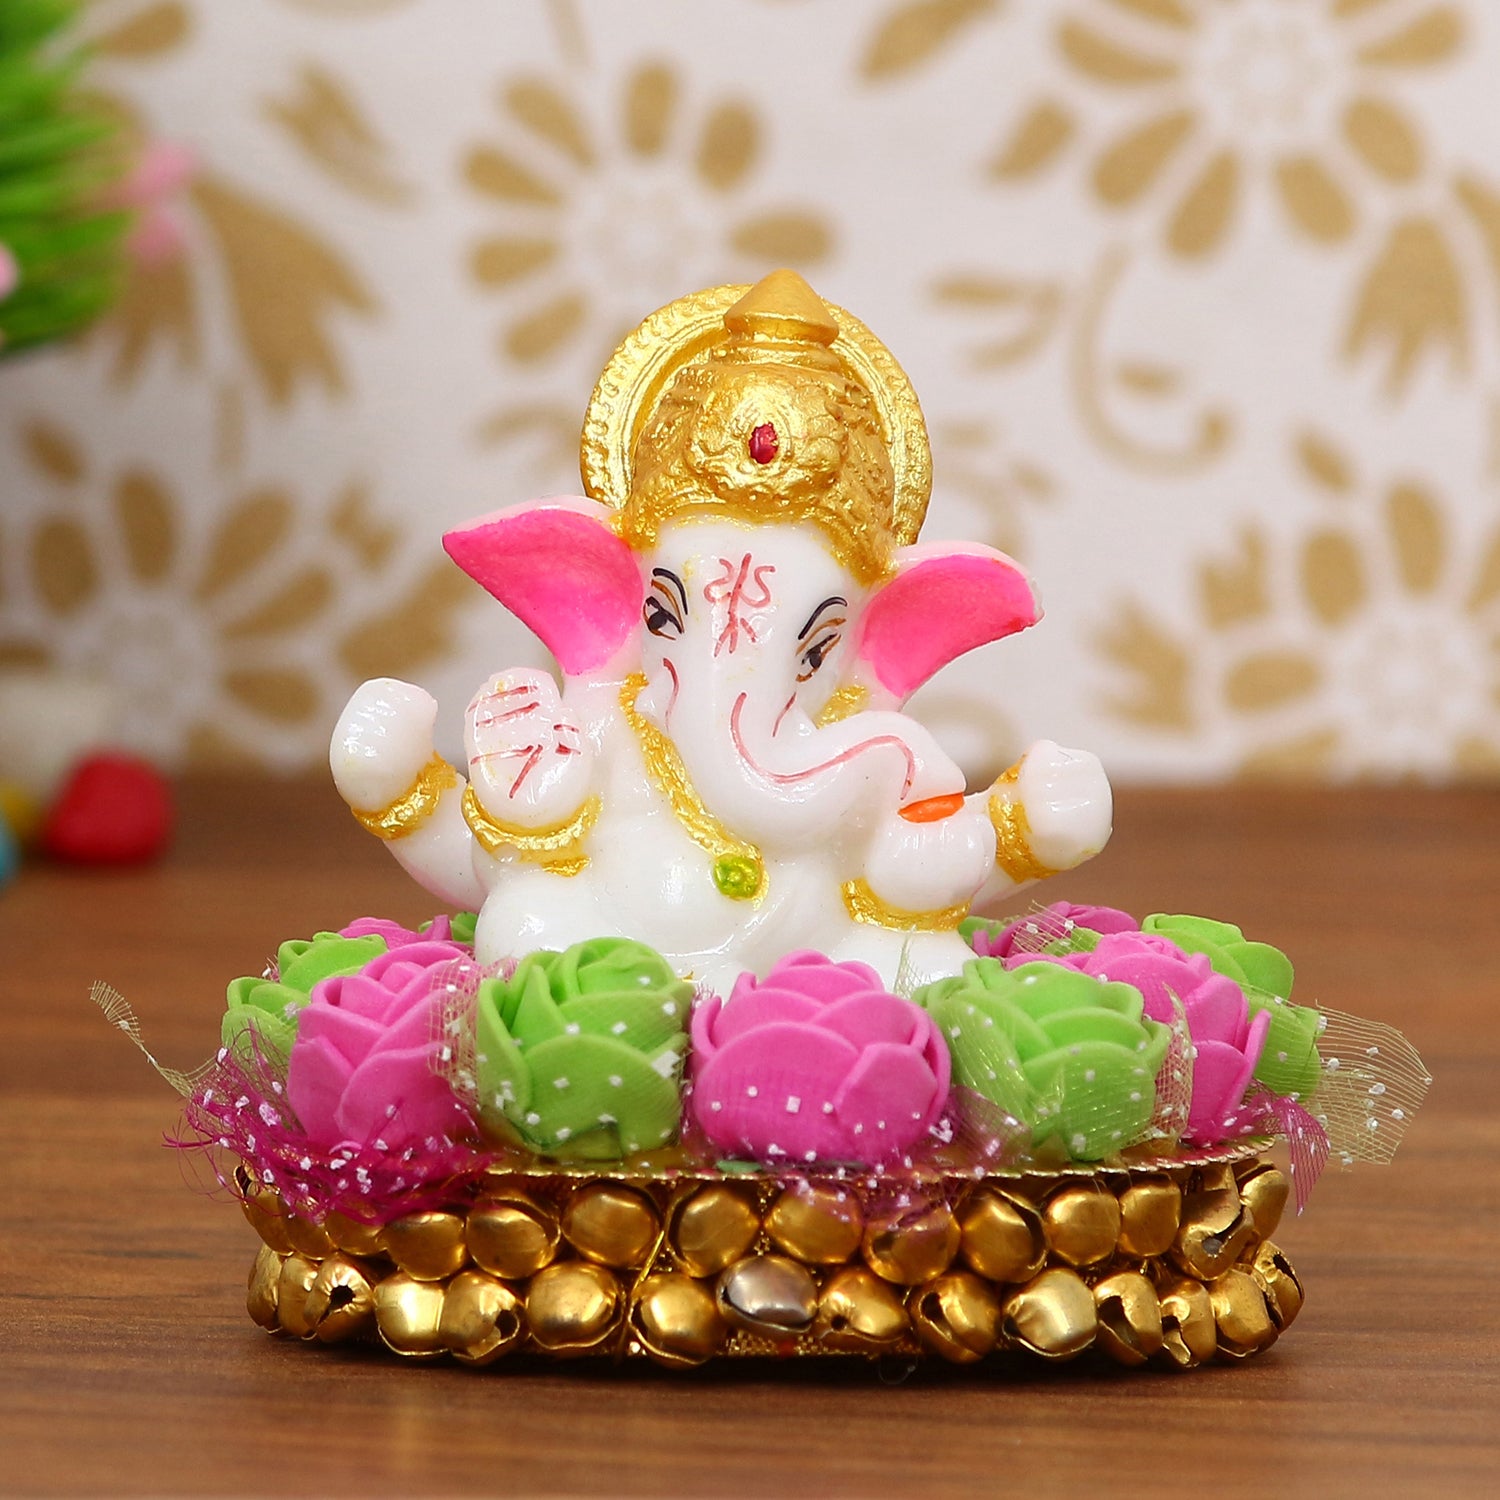 Golden and White Polyresin Lord Ganesha Idol on Decorative Pink and Green Flowers Plate